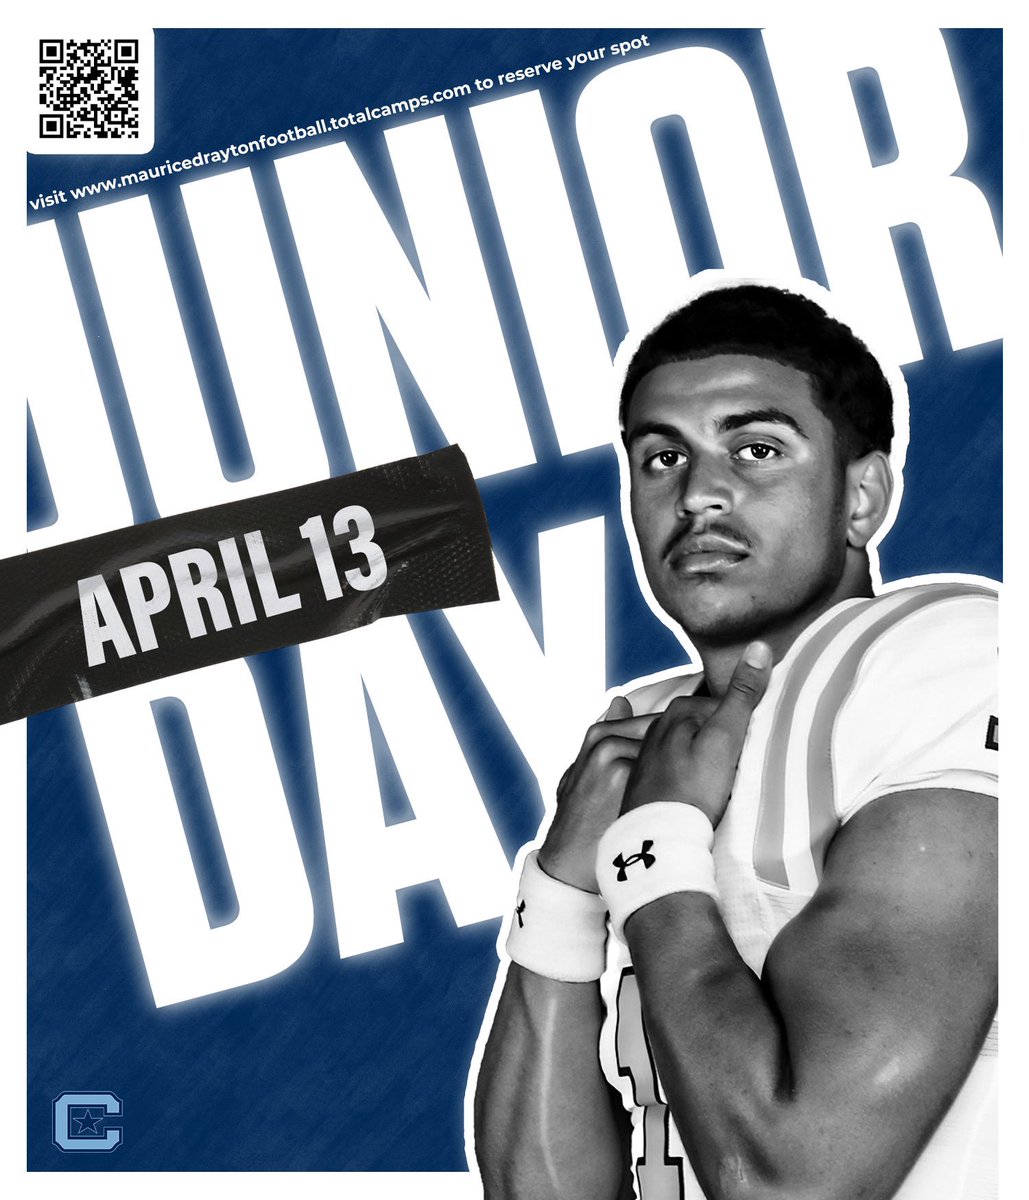 We are excited to get back into Johnson Hagood Stadium! Register now to reserve your spot at our Junior Day / Spring Game ! Hope to see you soon! #ArriveAtTheDel 🌴 mauricedraytonfootball.totalcamps.com